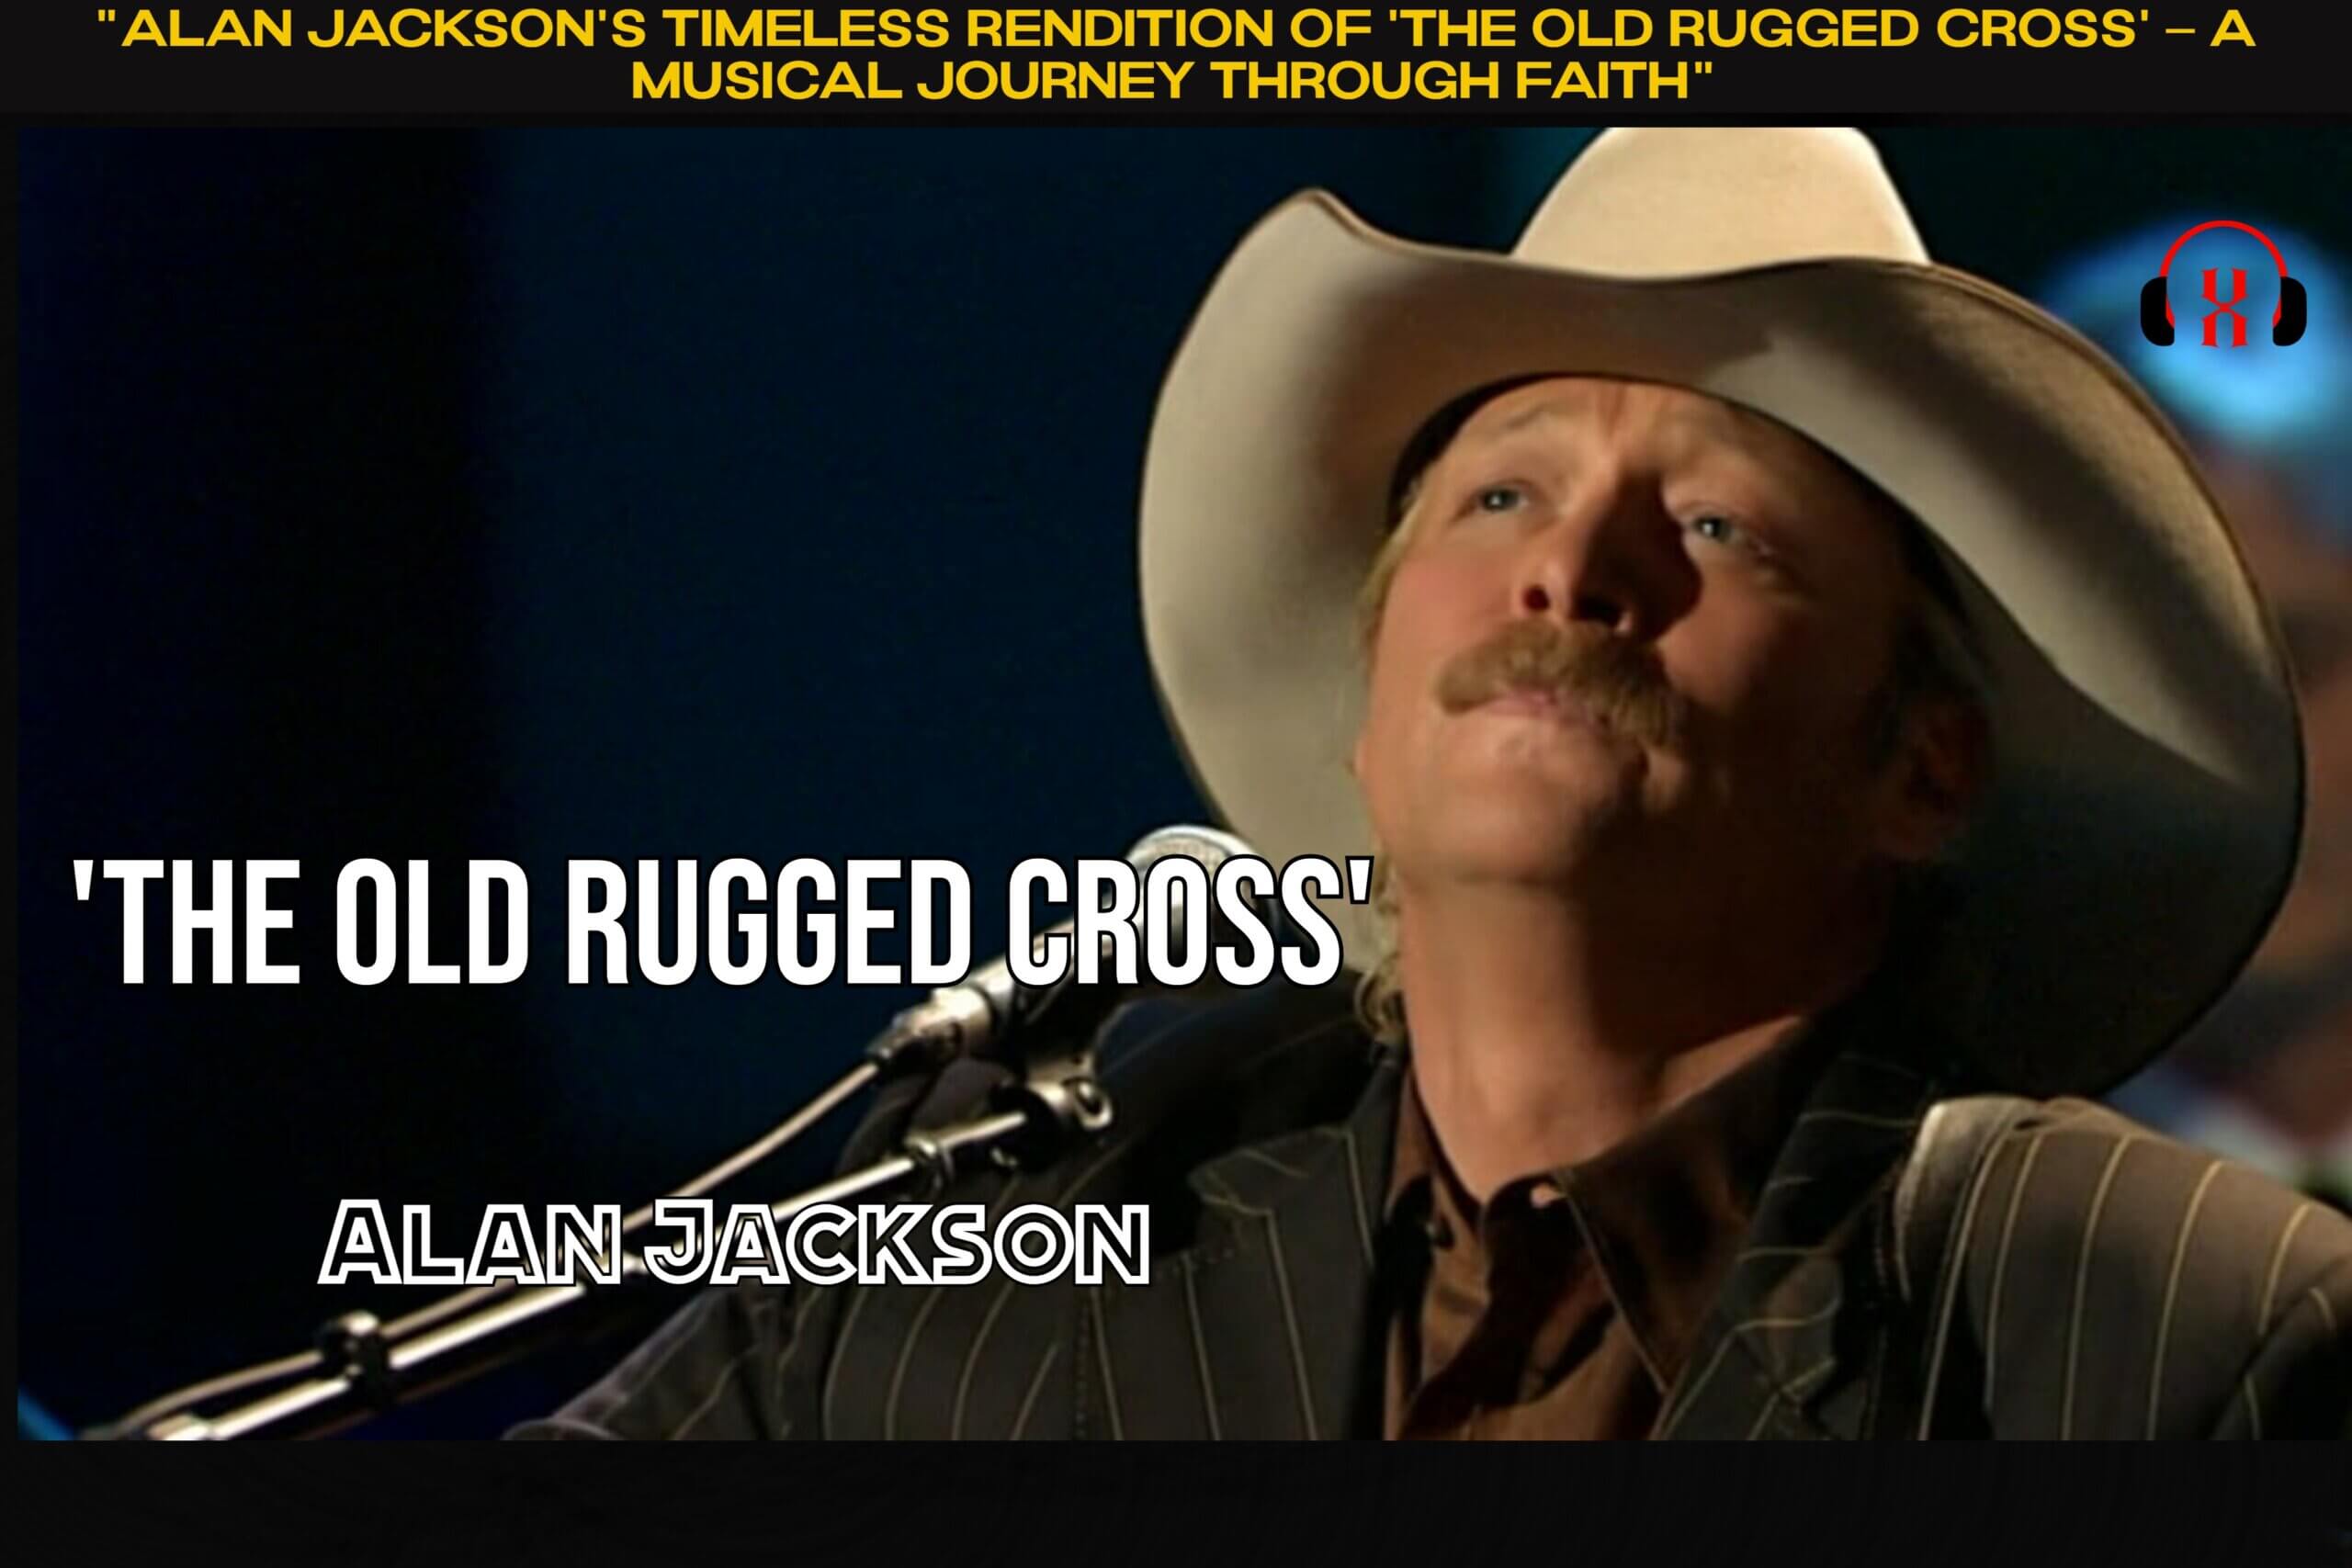 “Alan Jackson’s Timeless Rendition of ‘The Old Rugged Cross’ – A Musical Journey through Faith”